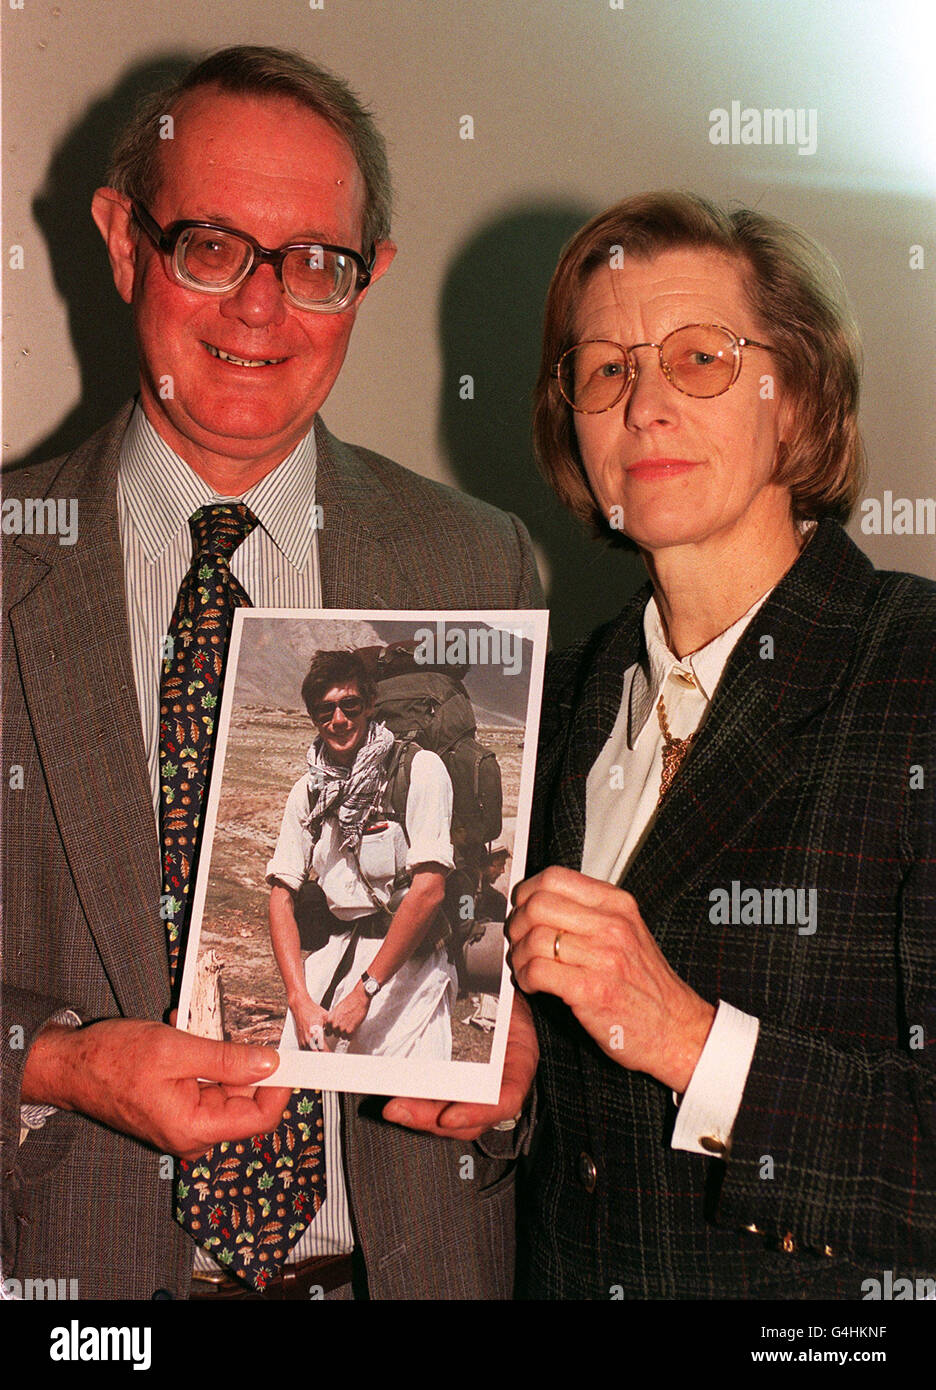 Quentin & Henrietta Goggs hold a picture of their 23-year-old son Timothy, who died while clearing mines in Afghanistan. 'Tim s Fund', the charity set up in 1992 in his memory, was awarded 70,000 pounds by the Diana, Princess of Wales Memorial Fund. Stock Photo